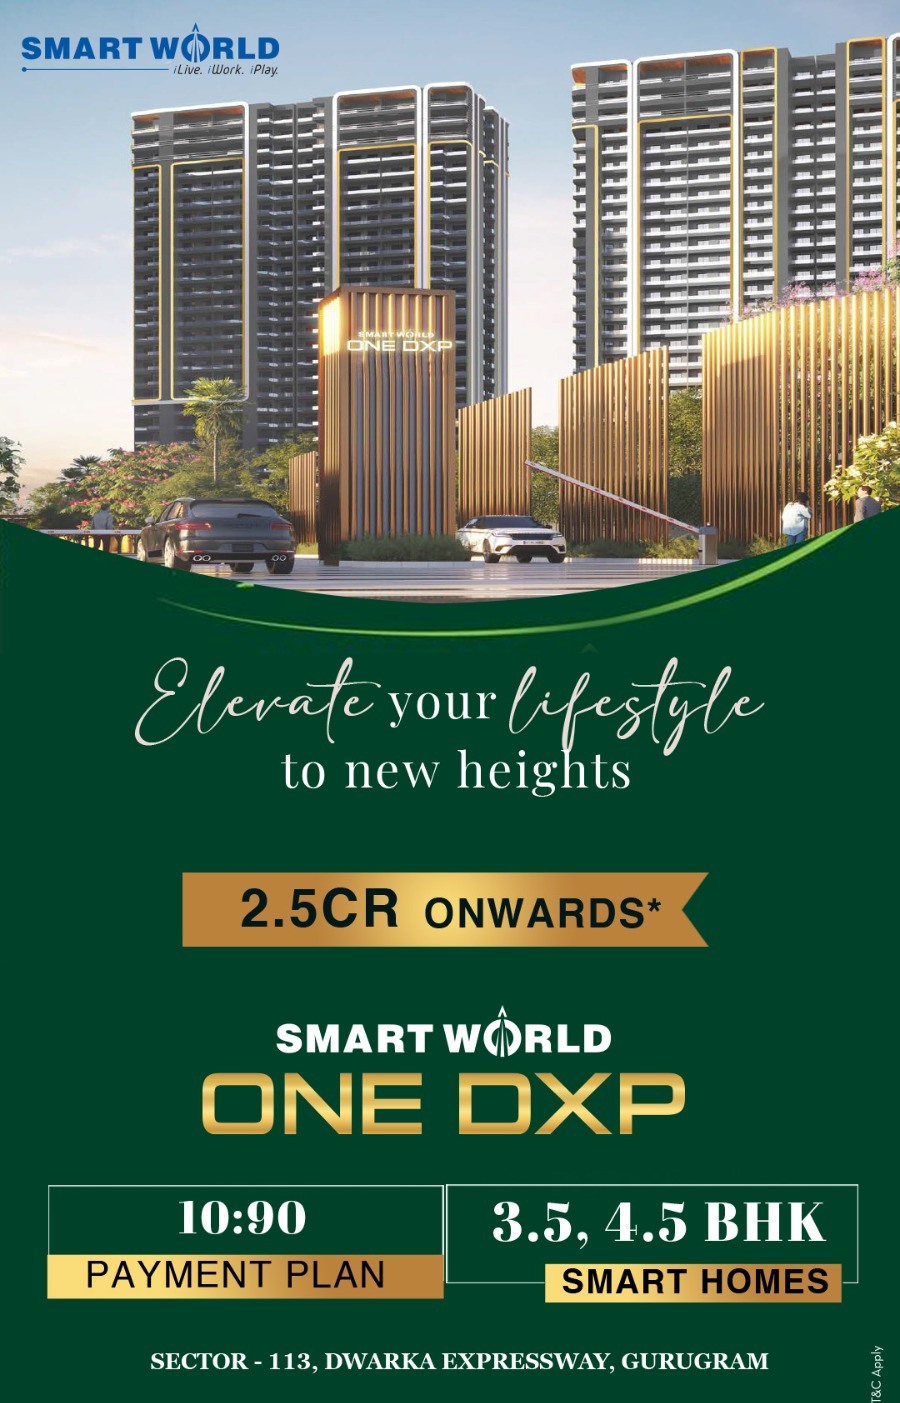 The residential property offers an extraordinary front room and utility including modular kitchens and terraces at Smart World One DXP, Gurgaon